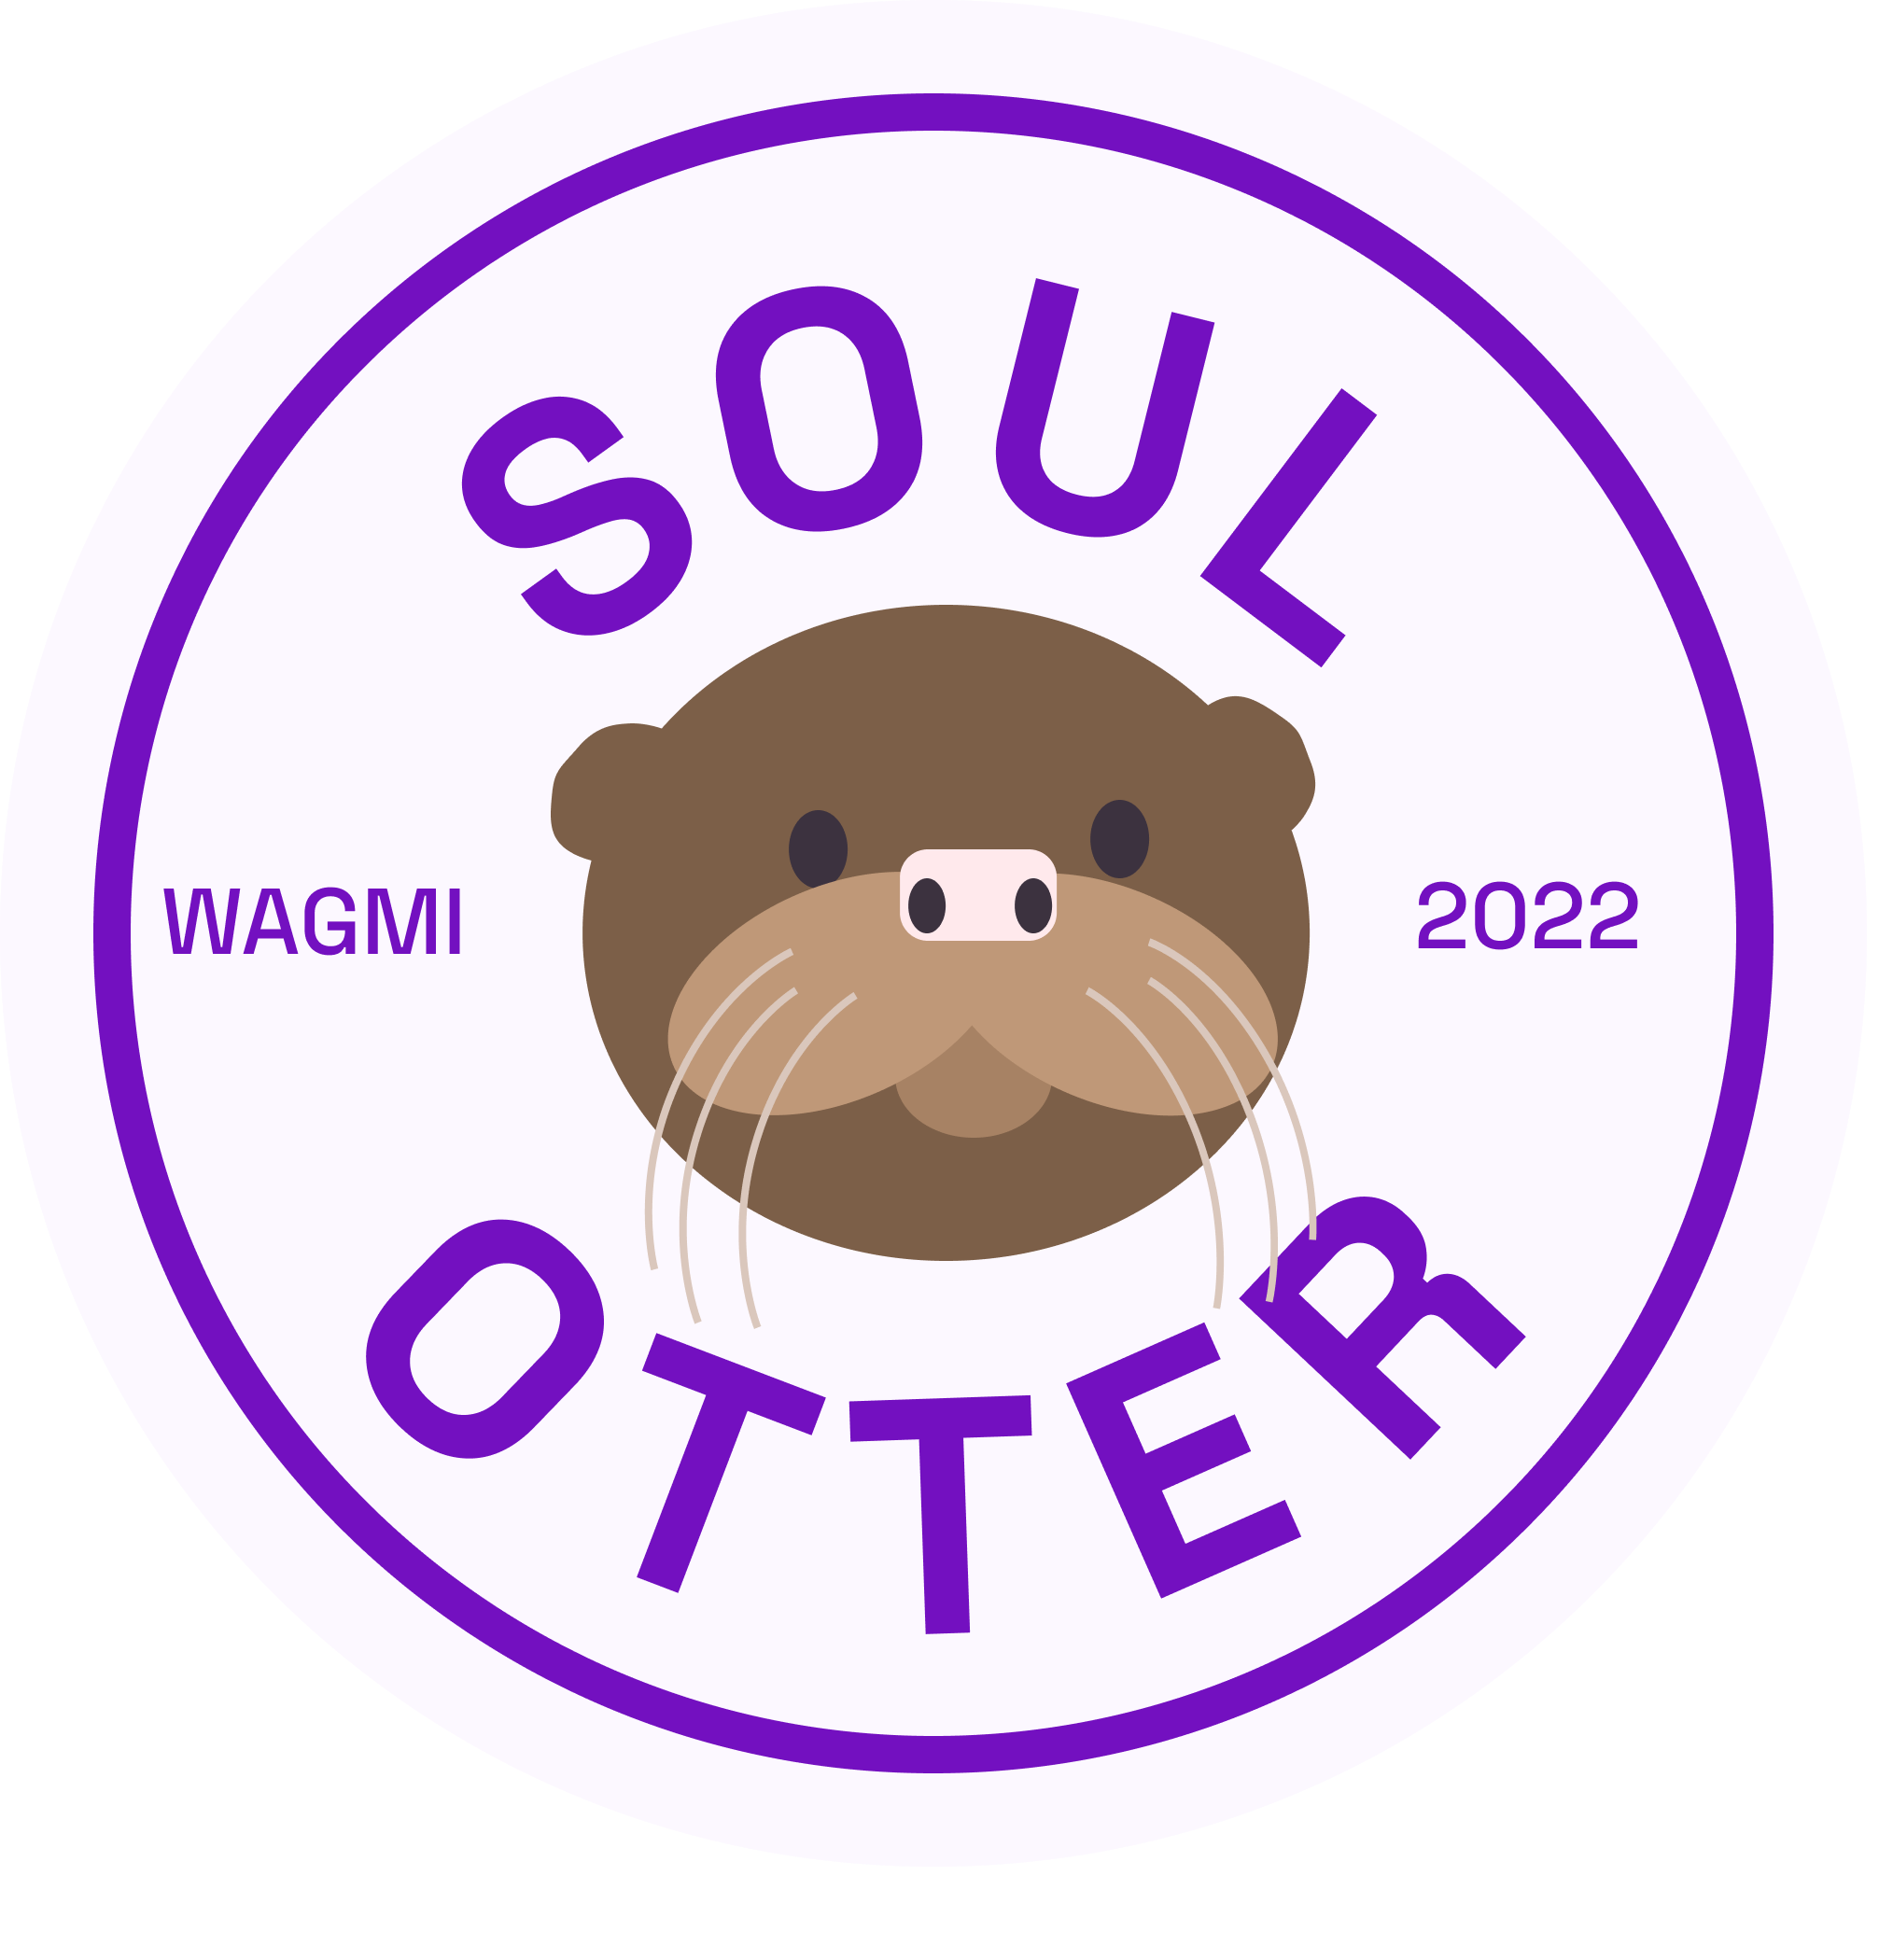 The Otter Badge